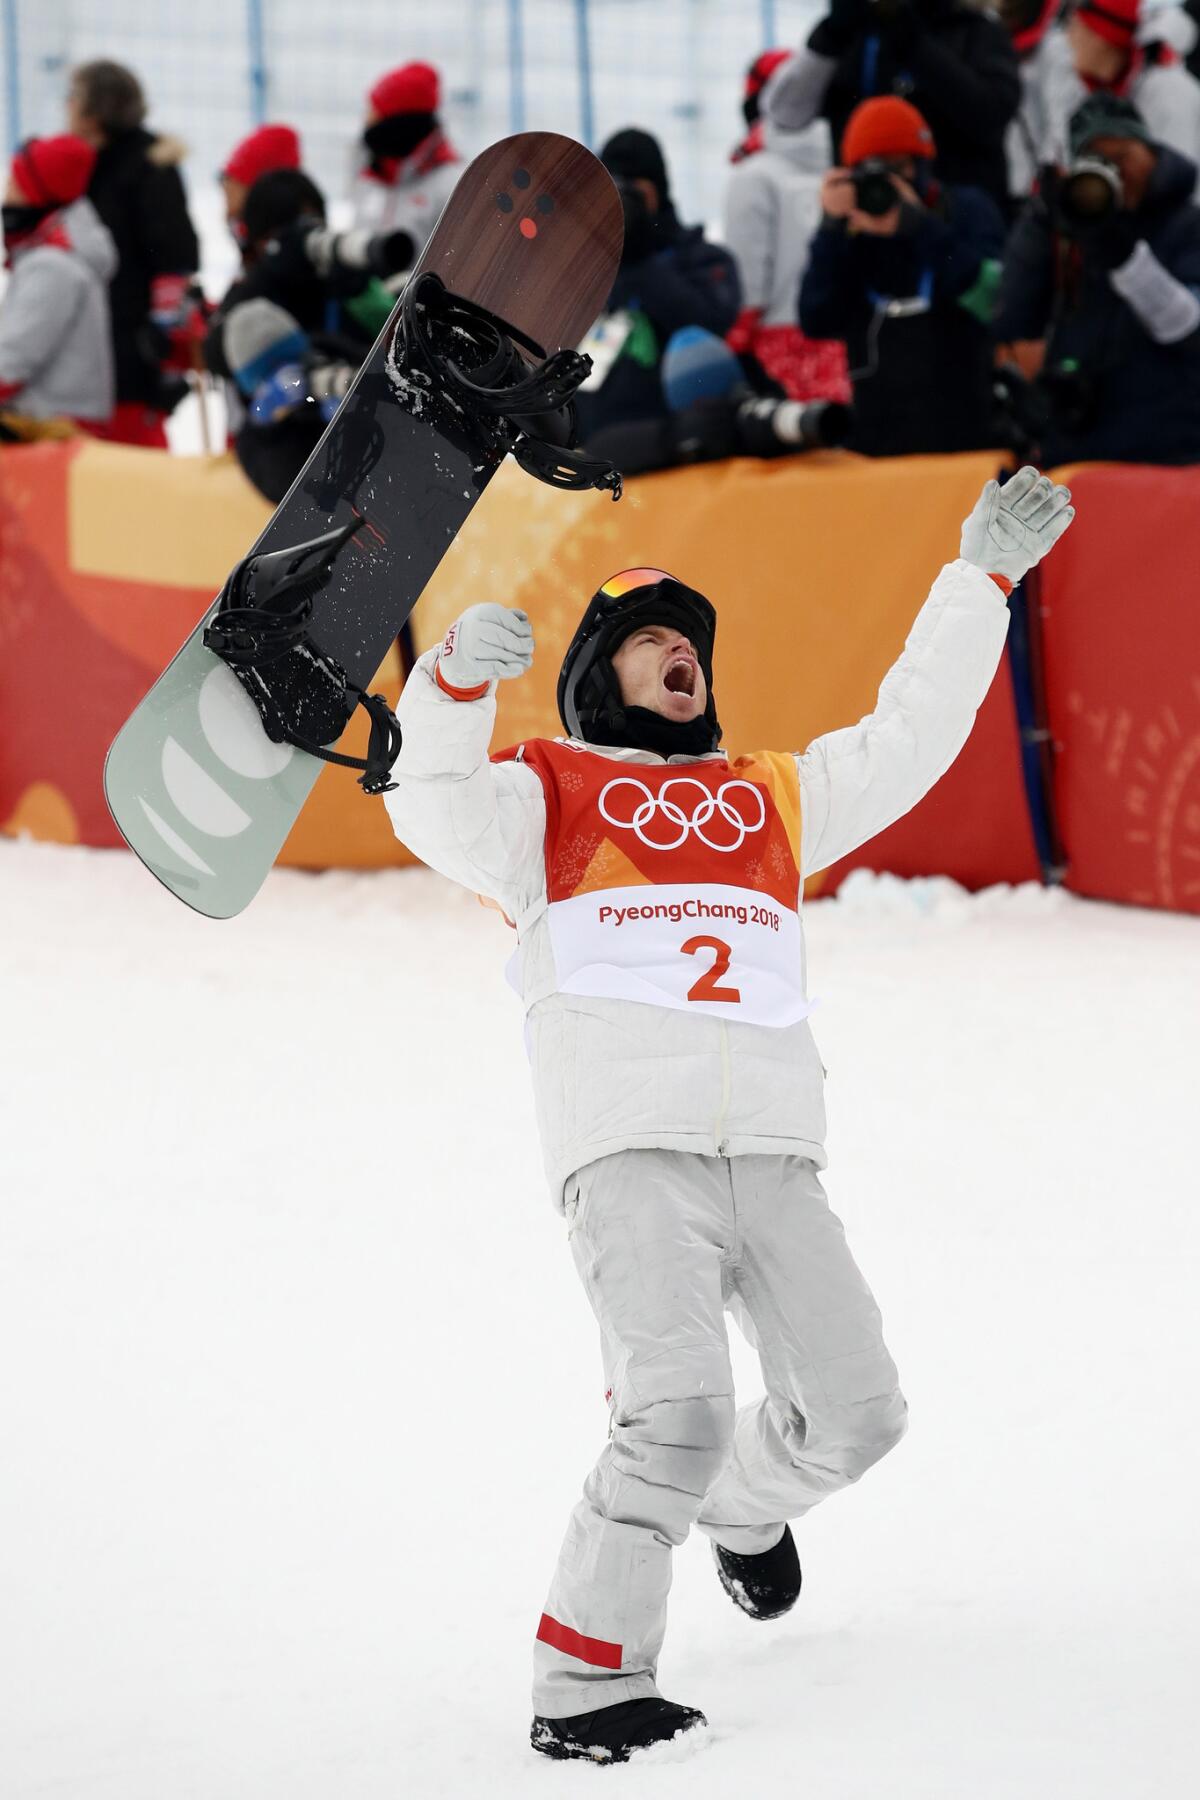 Shaun White competes in the Snowboard Men's Halfpipe Final at the 2018 Winter Olympics.